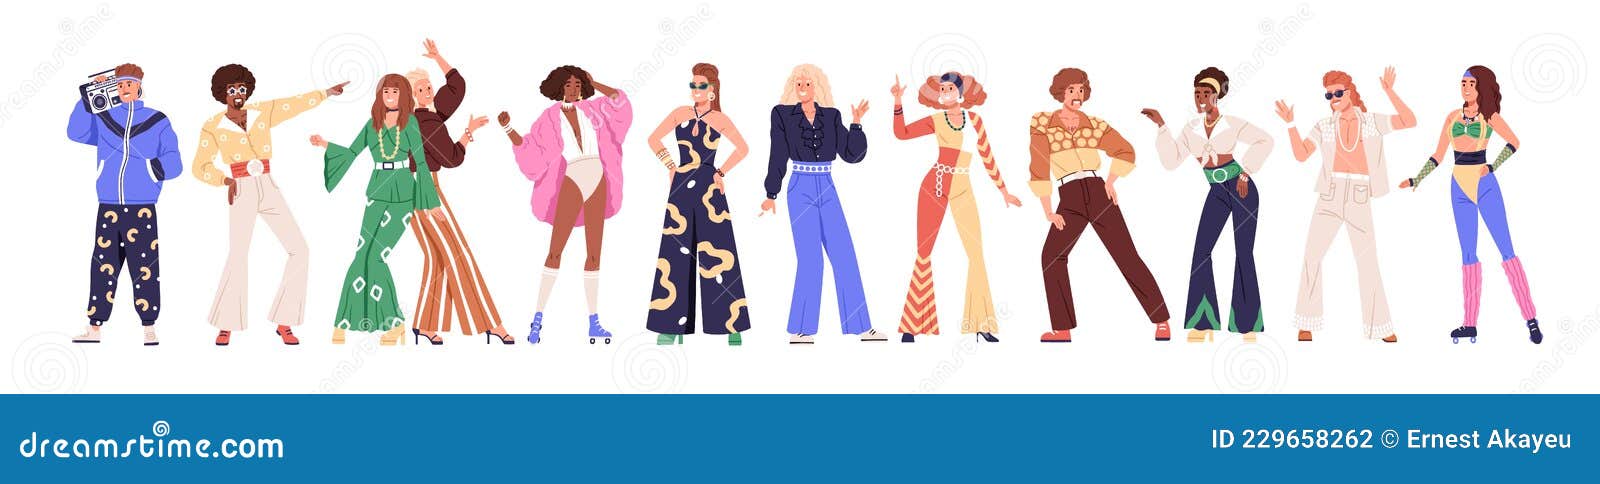 Happy people in 80s fashion style clothes set Vector Image